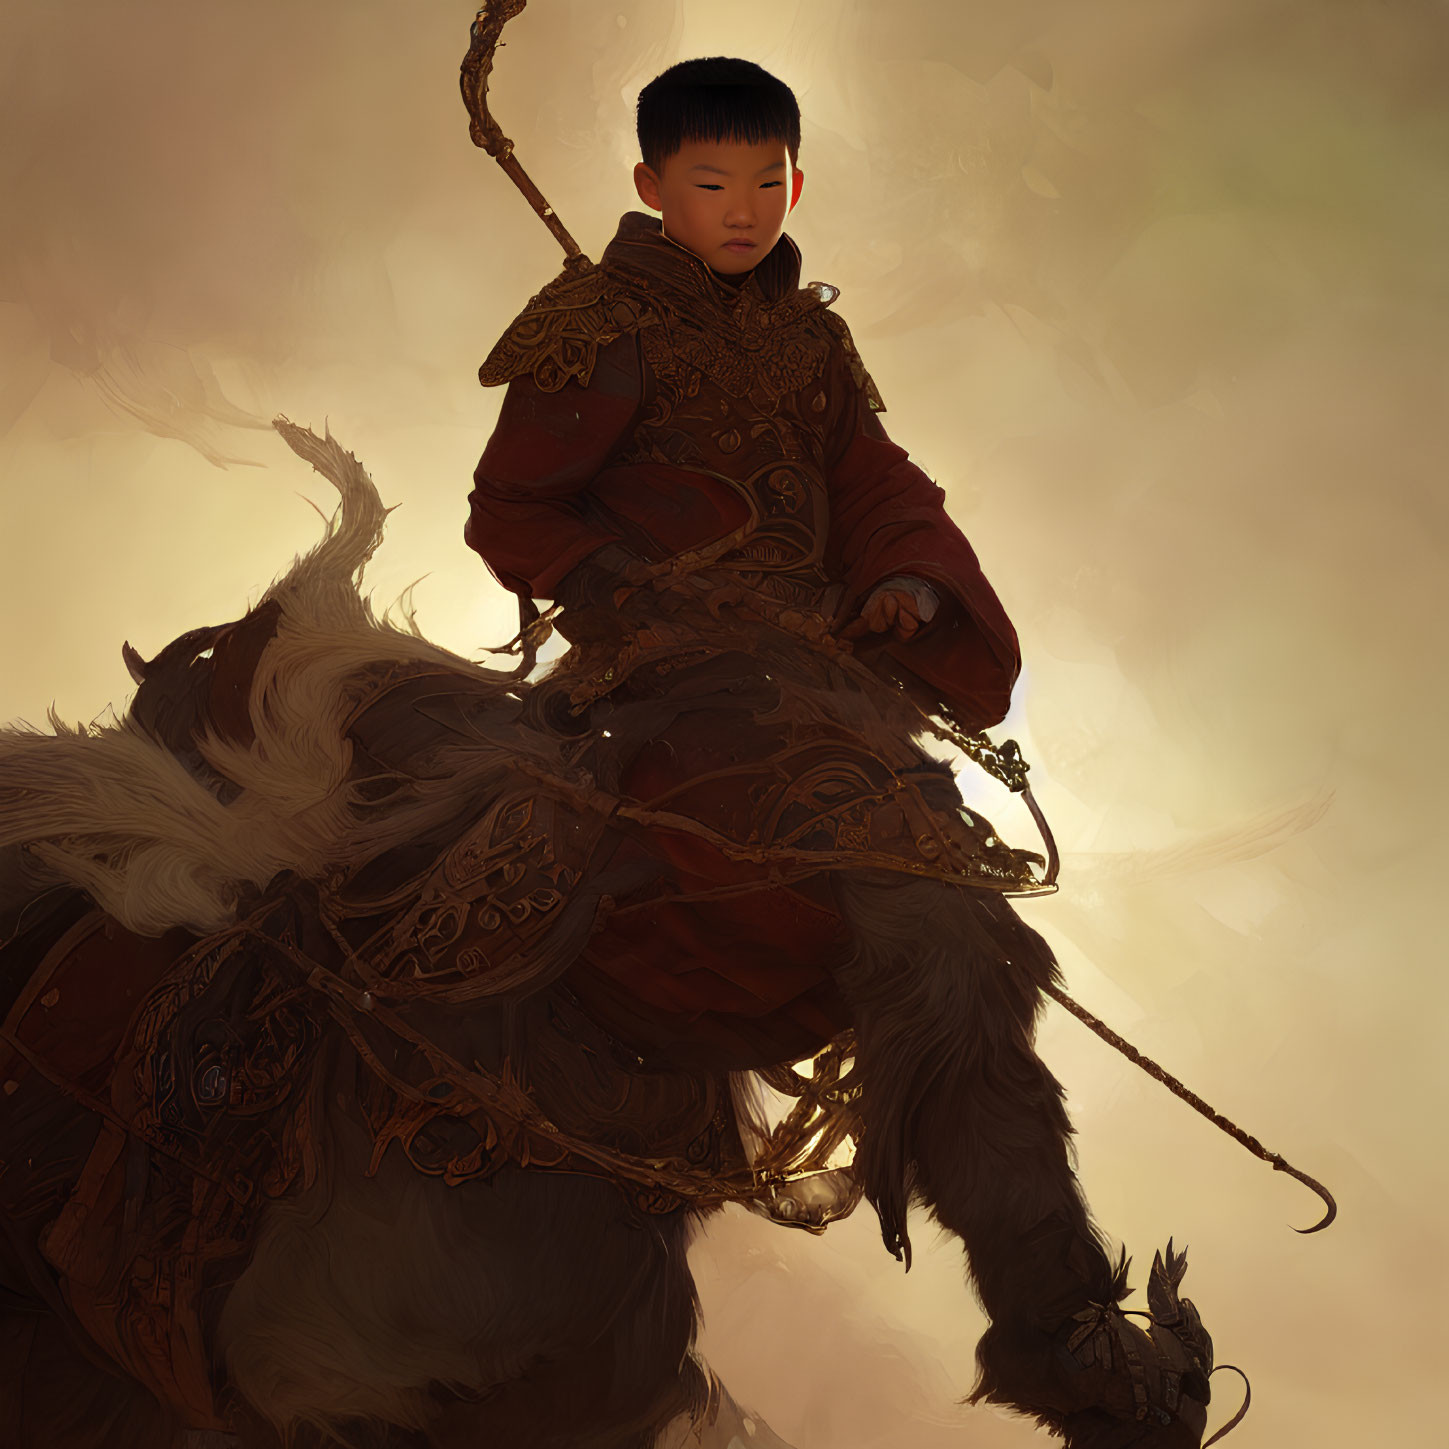 Young boy in red armor on furry creature in misty environment